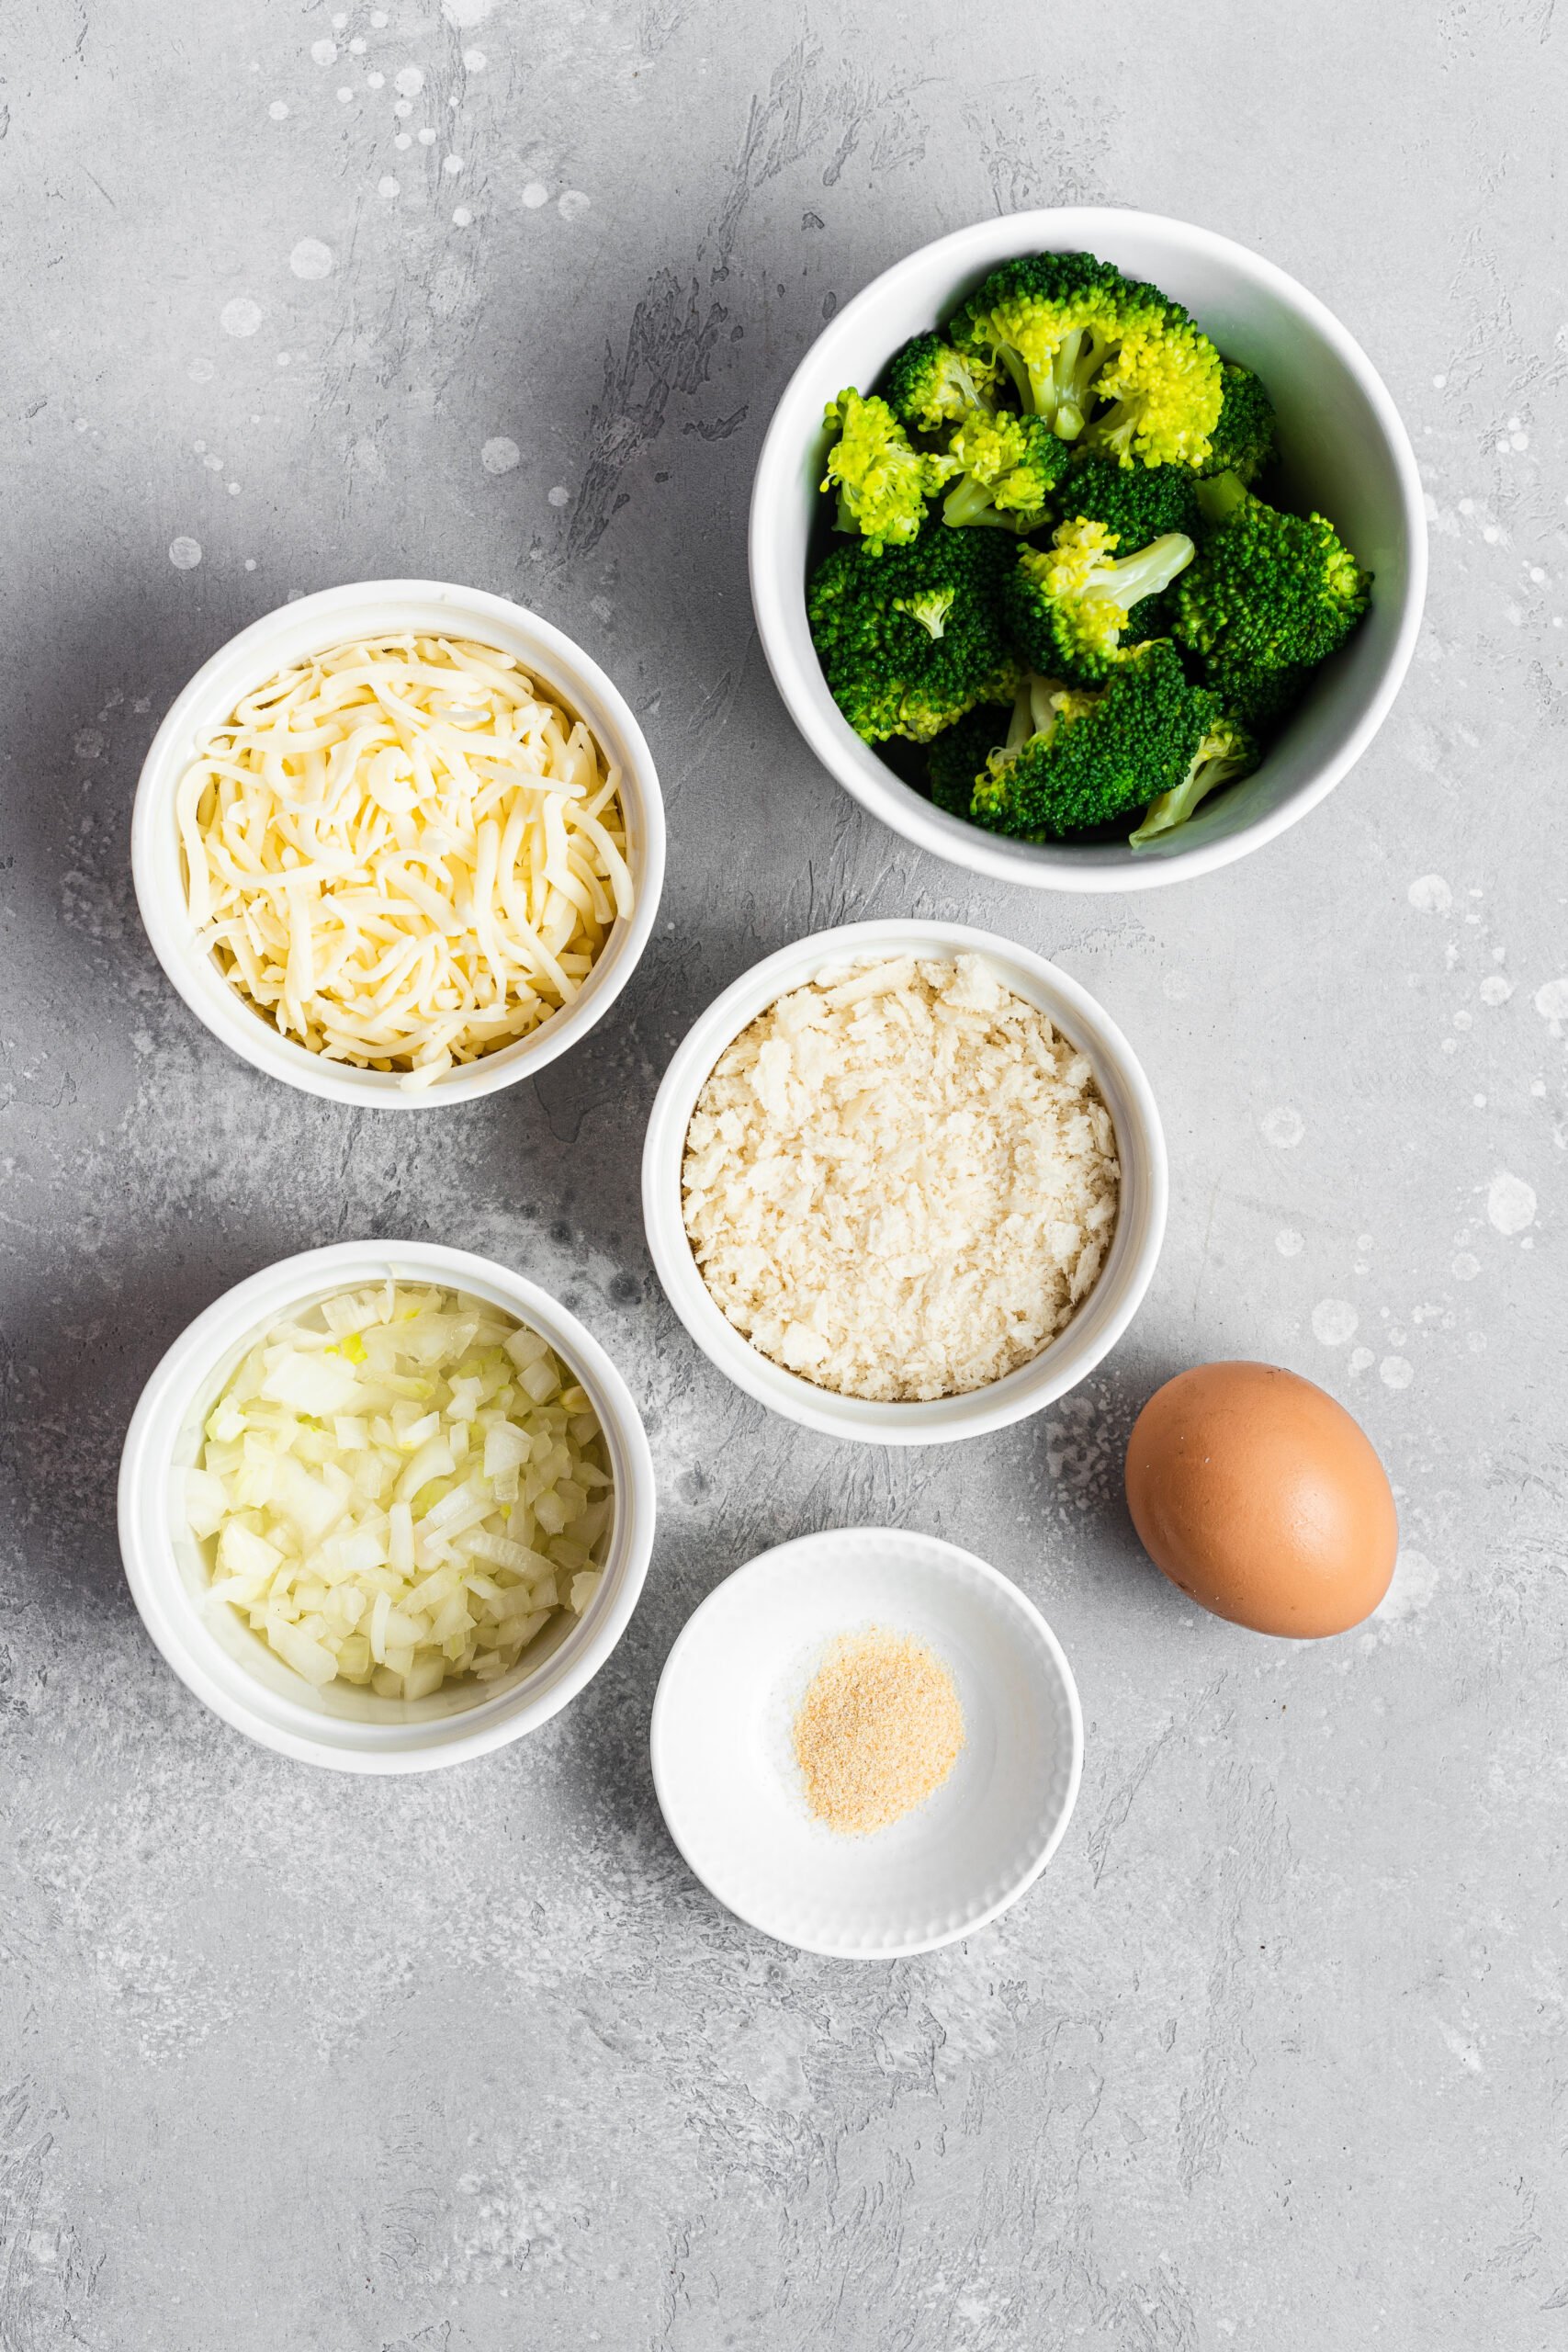 Ingredients to make broccoli and cheese bites. Specifics provided in recipe card.